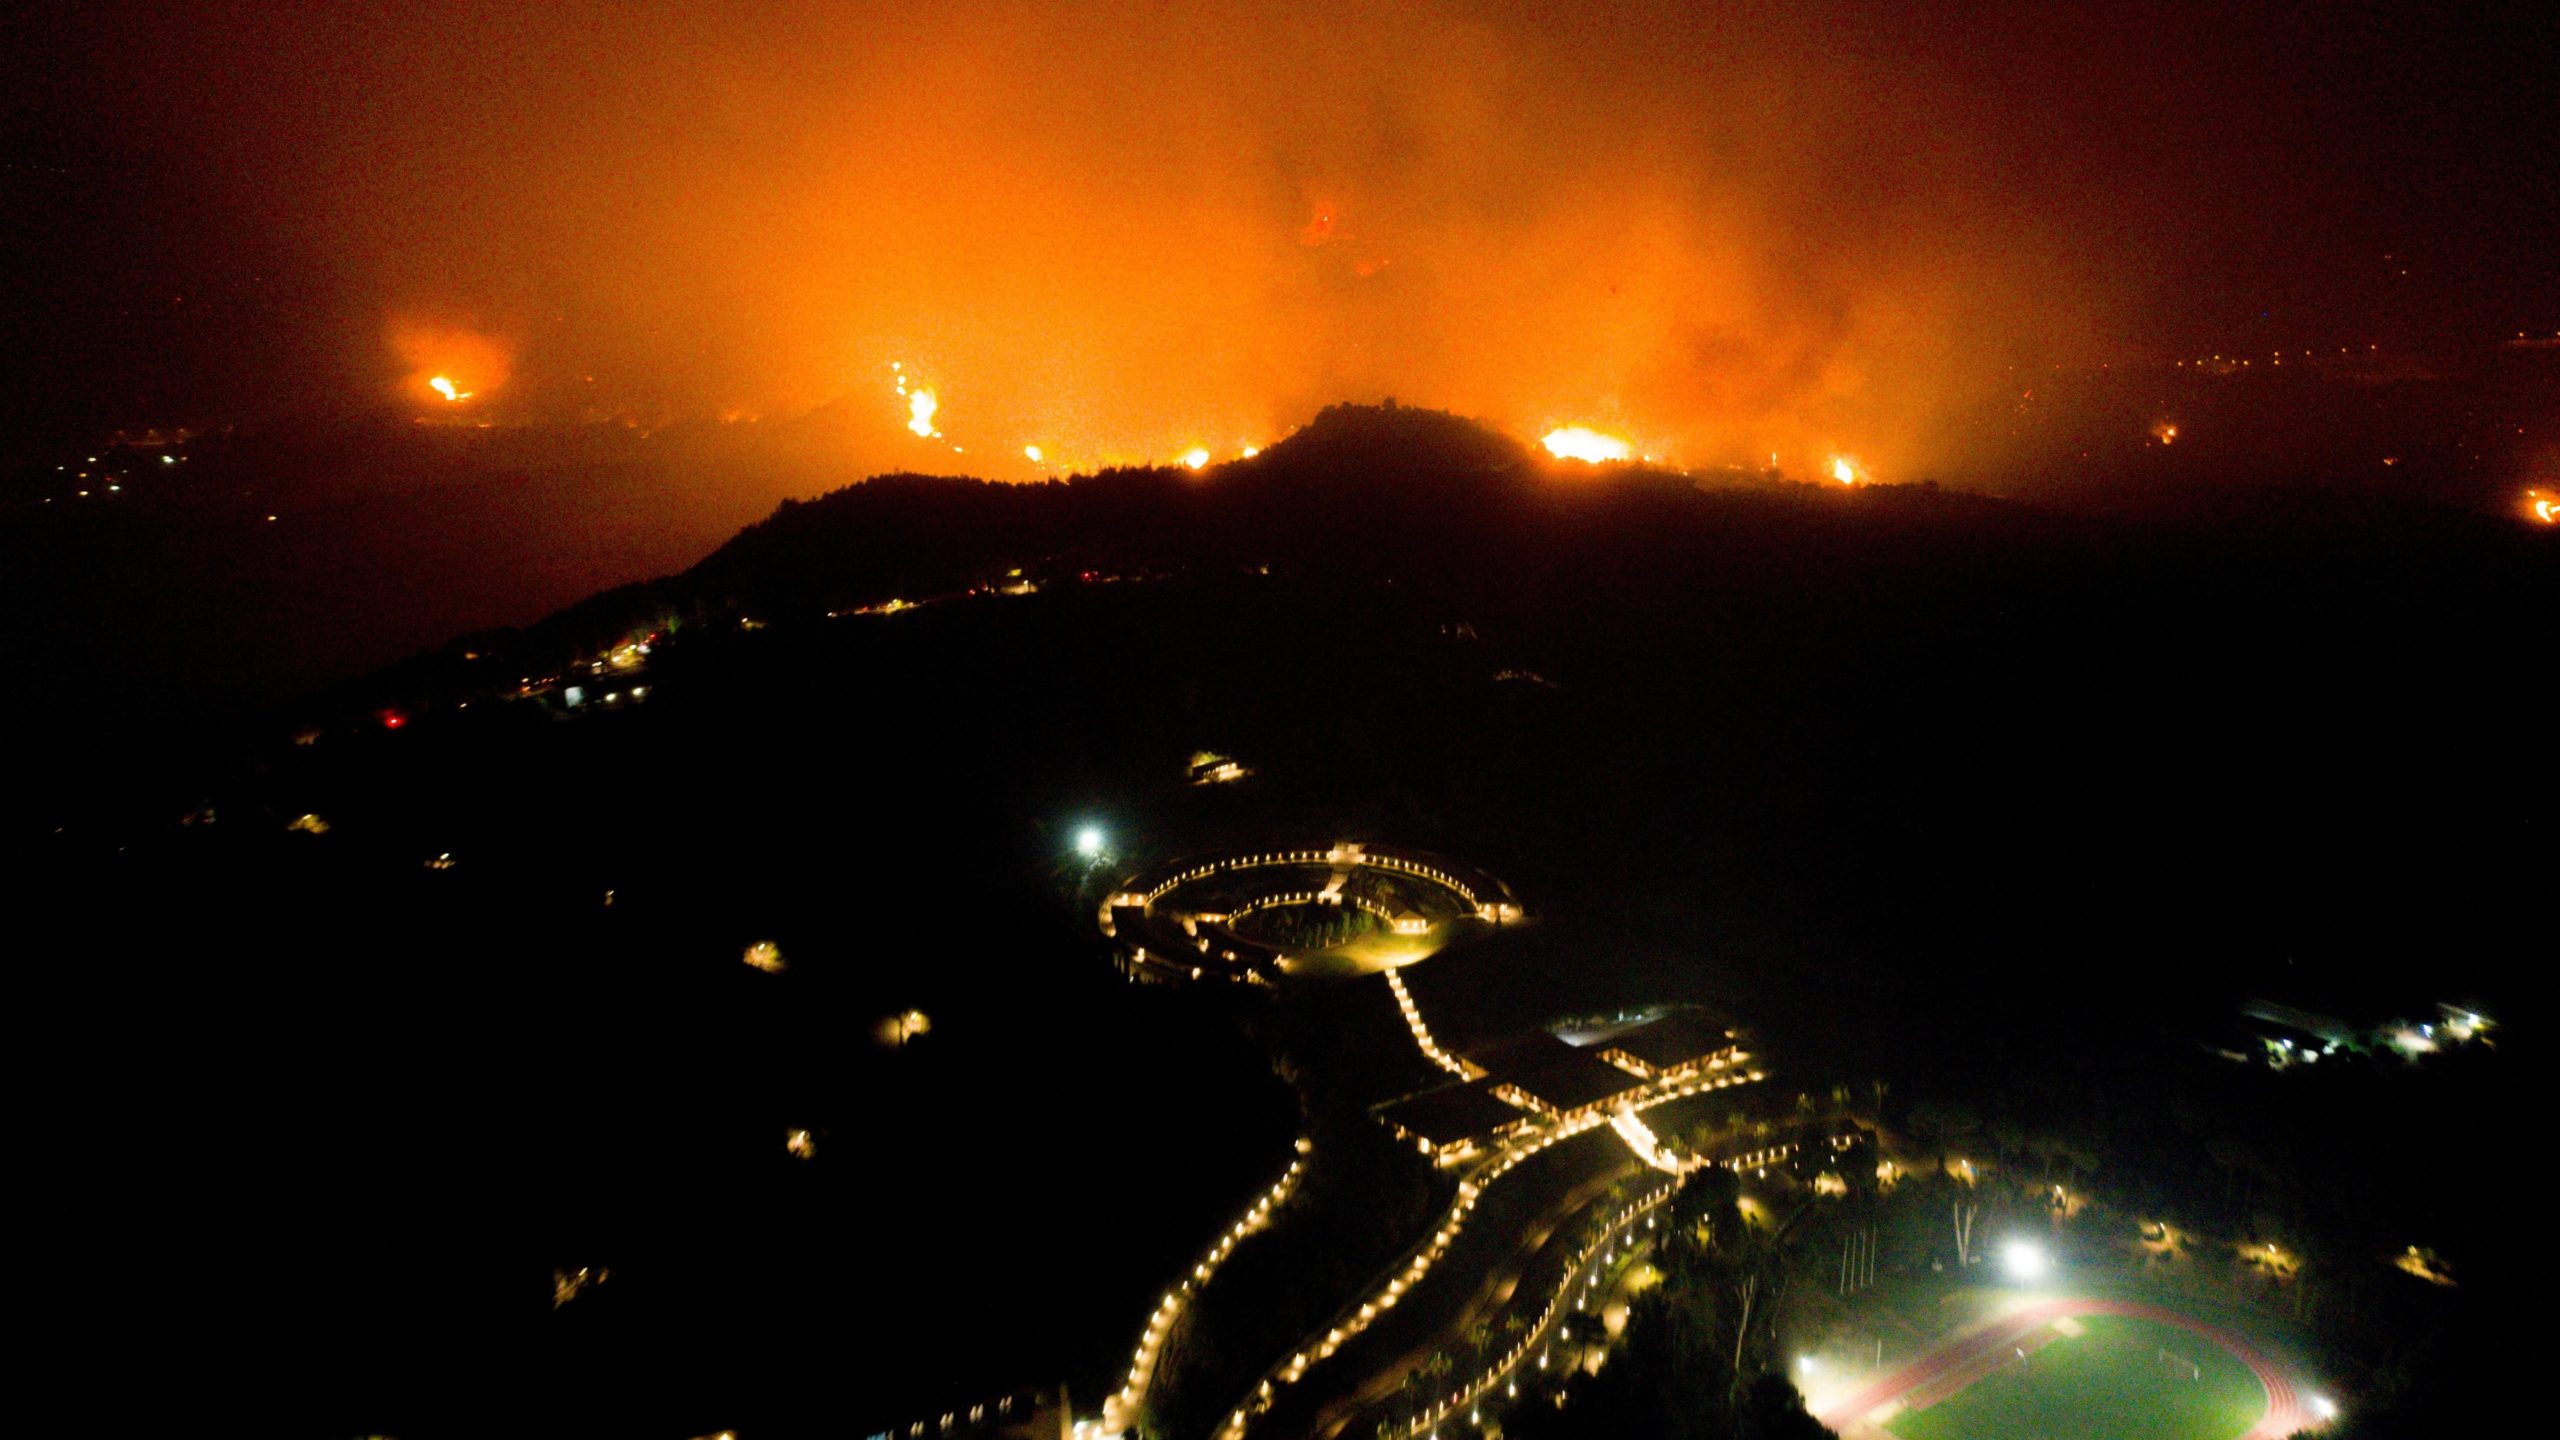 A wildfire approaches the Olympic Academy in western Greece on August 4, 2021. (Photo: Eurokinissi/AFP, Getty Images)